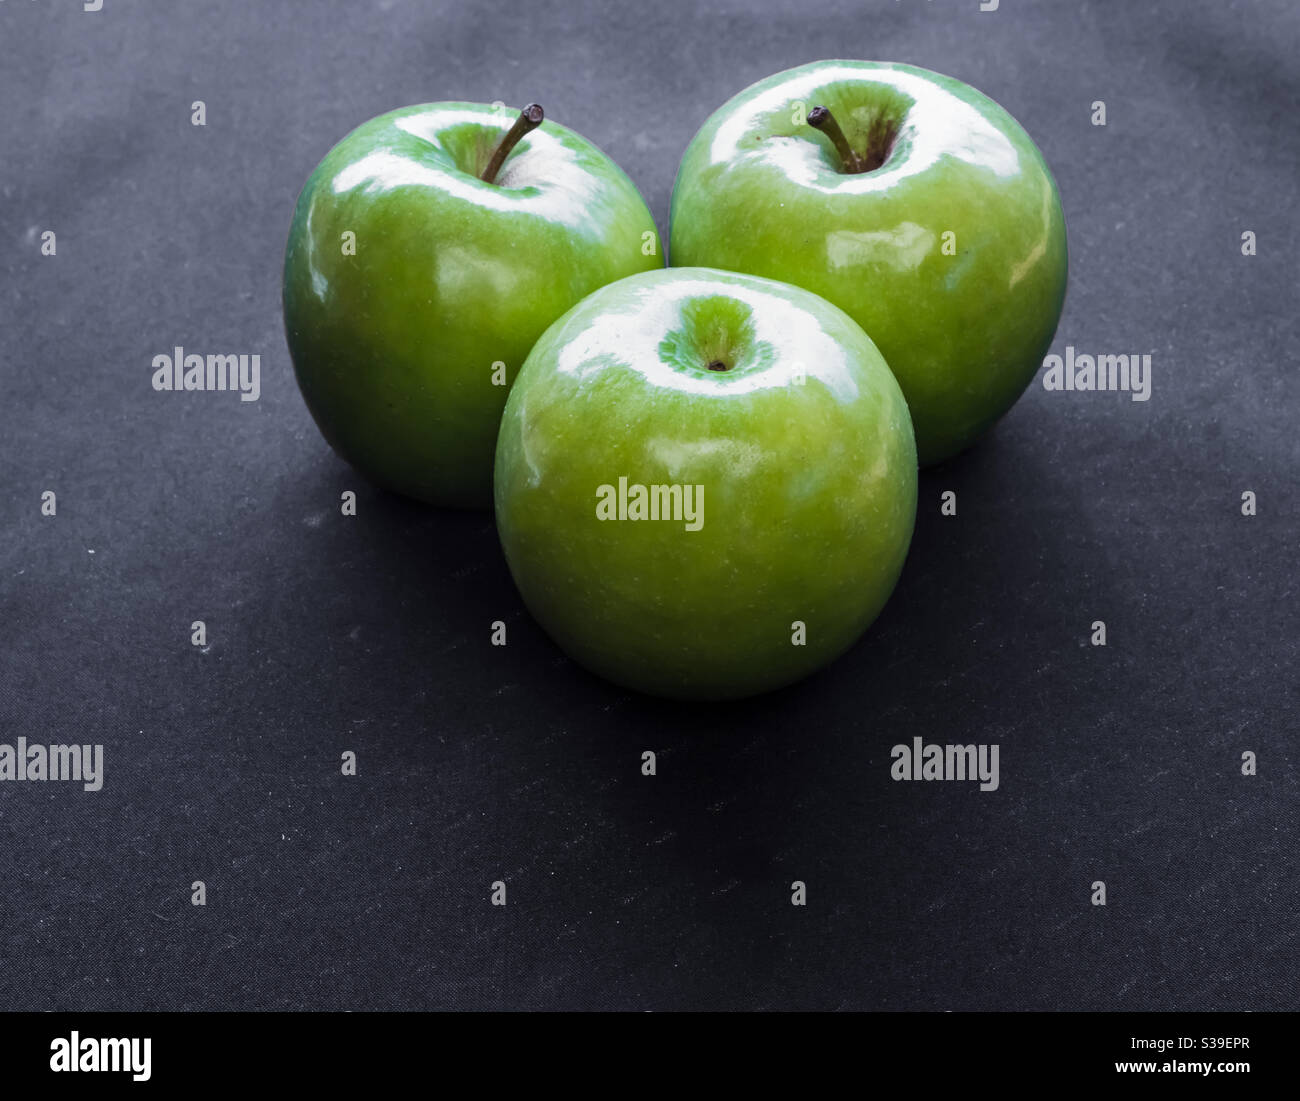 3 green apples on a black background Stock Photo